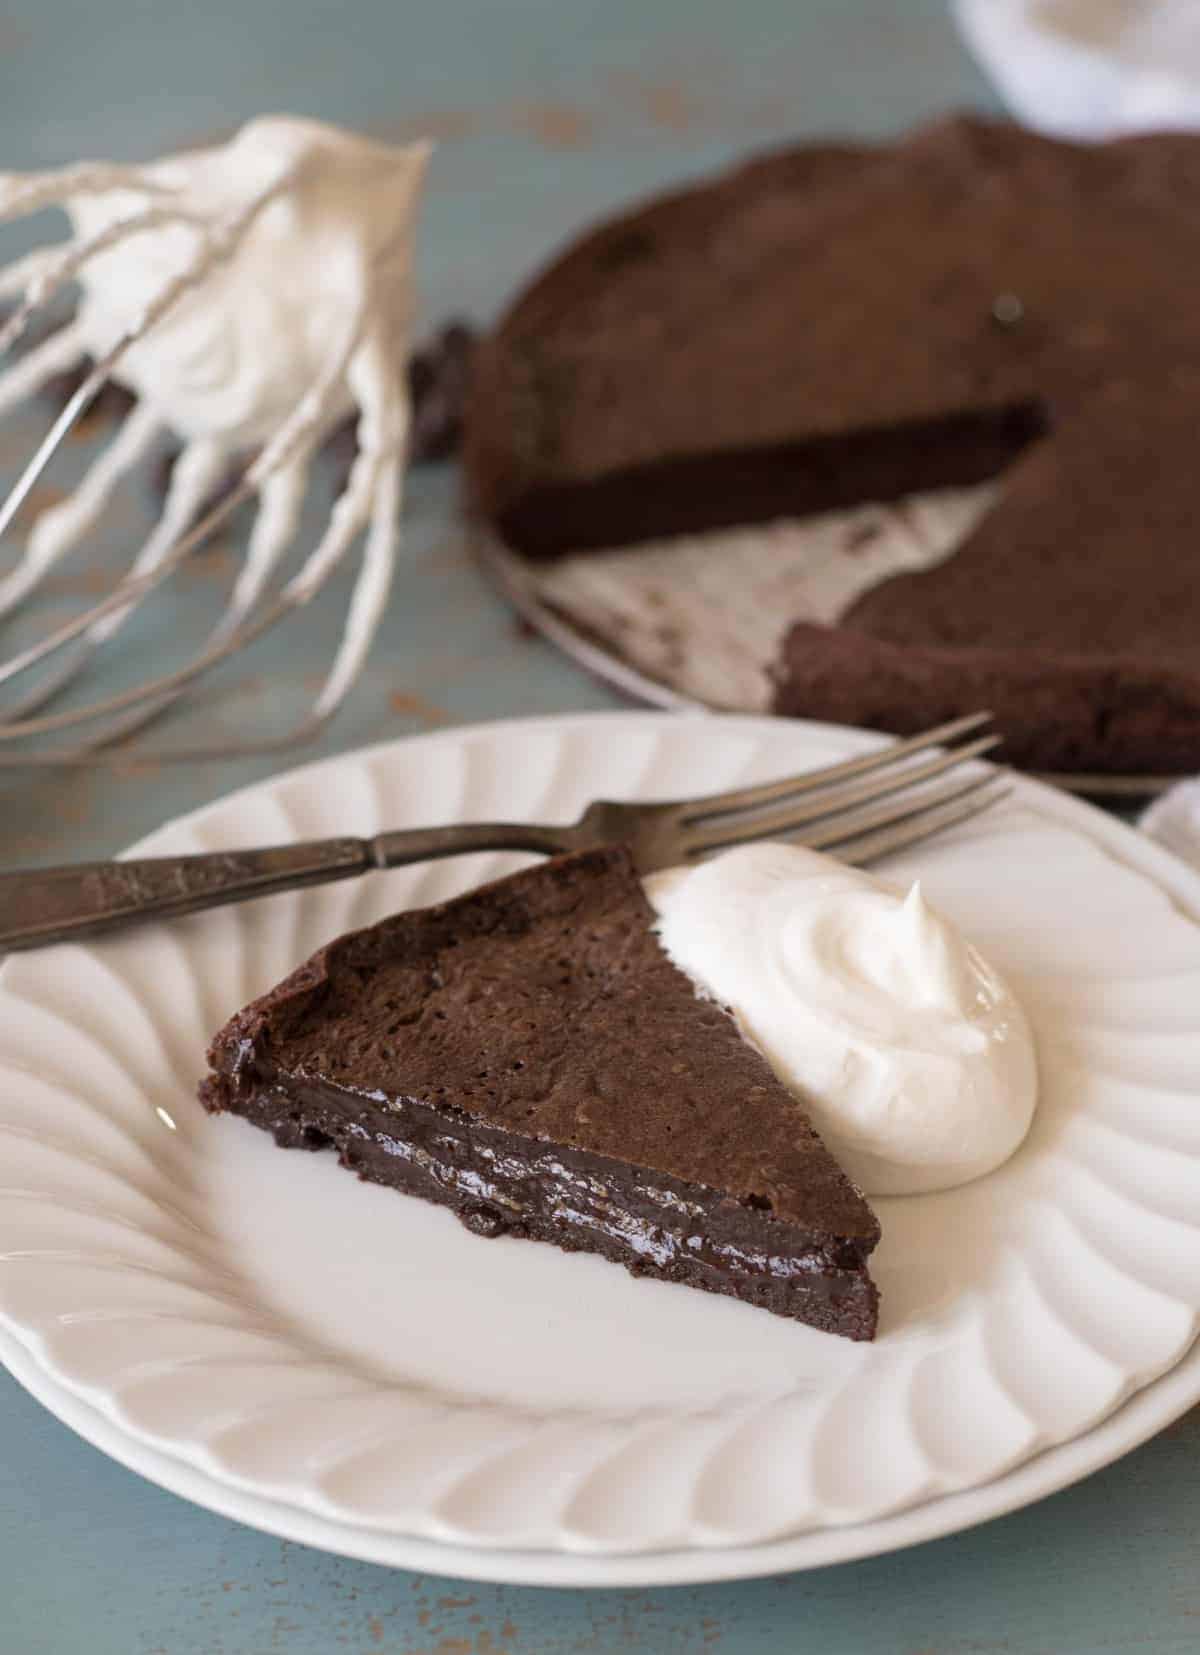 A super simple yet very impressive rich and fudgy flourless chocolate cake recipe that is made with common ingredients, done in less than 30 minutes, and is naturally gluten free.